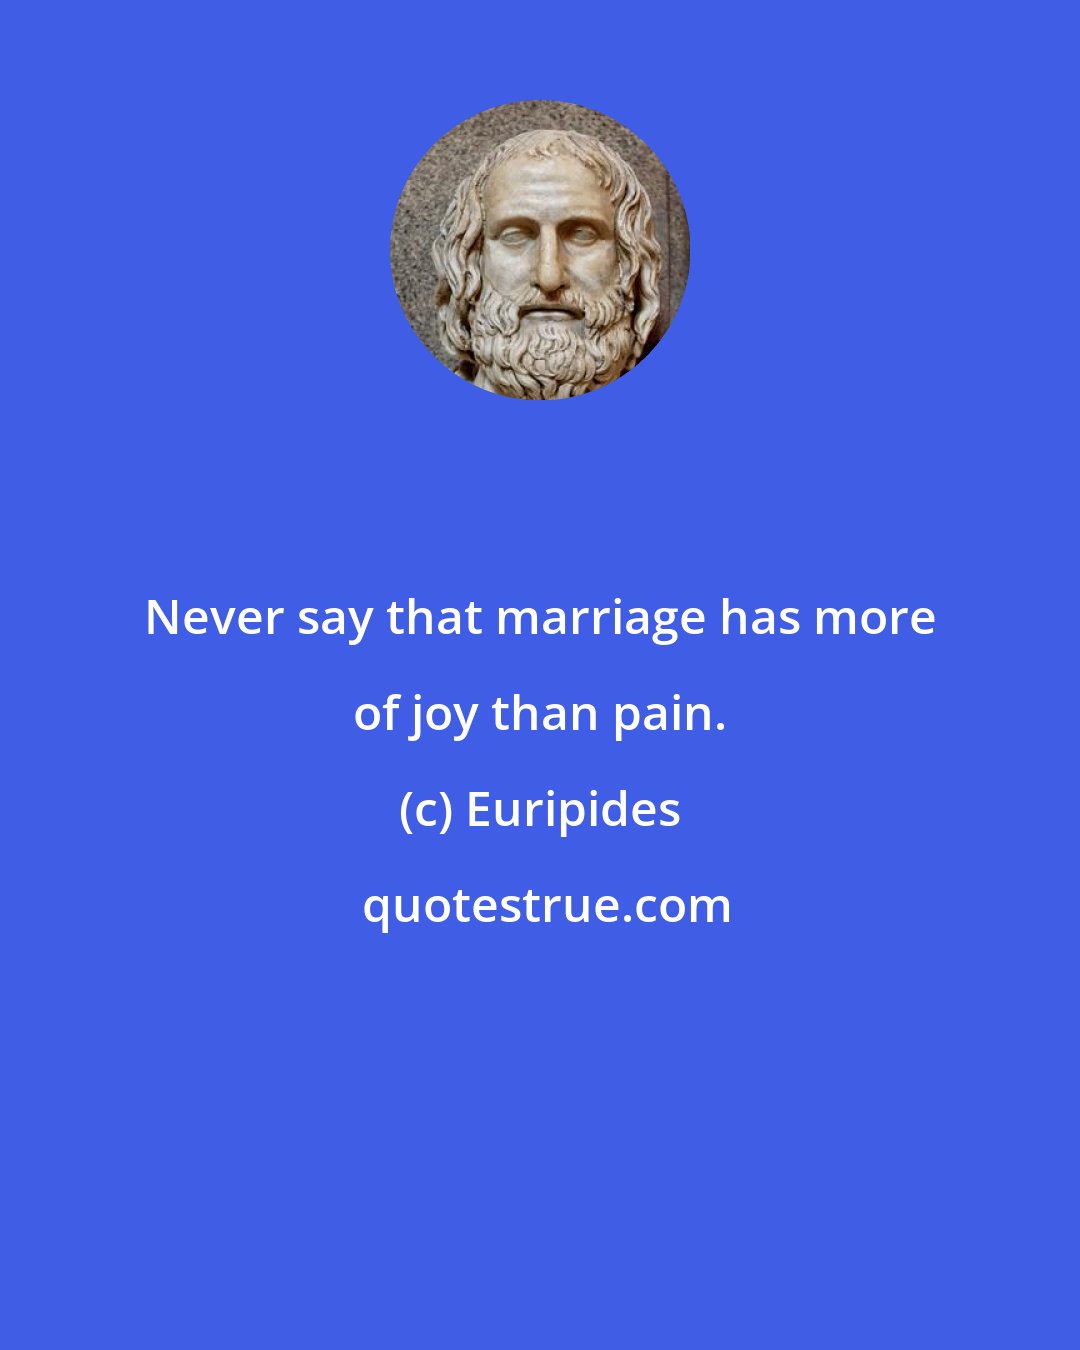 Euripides: Never say that marriage has more of joy than pain.